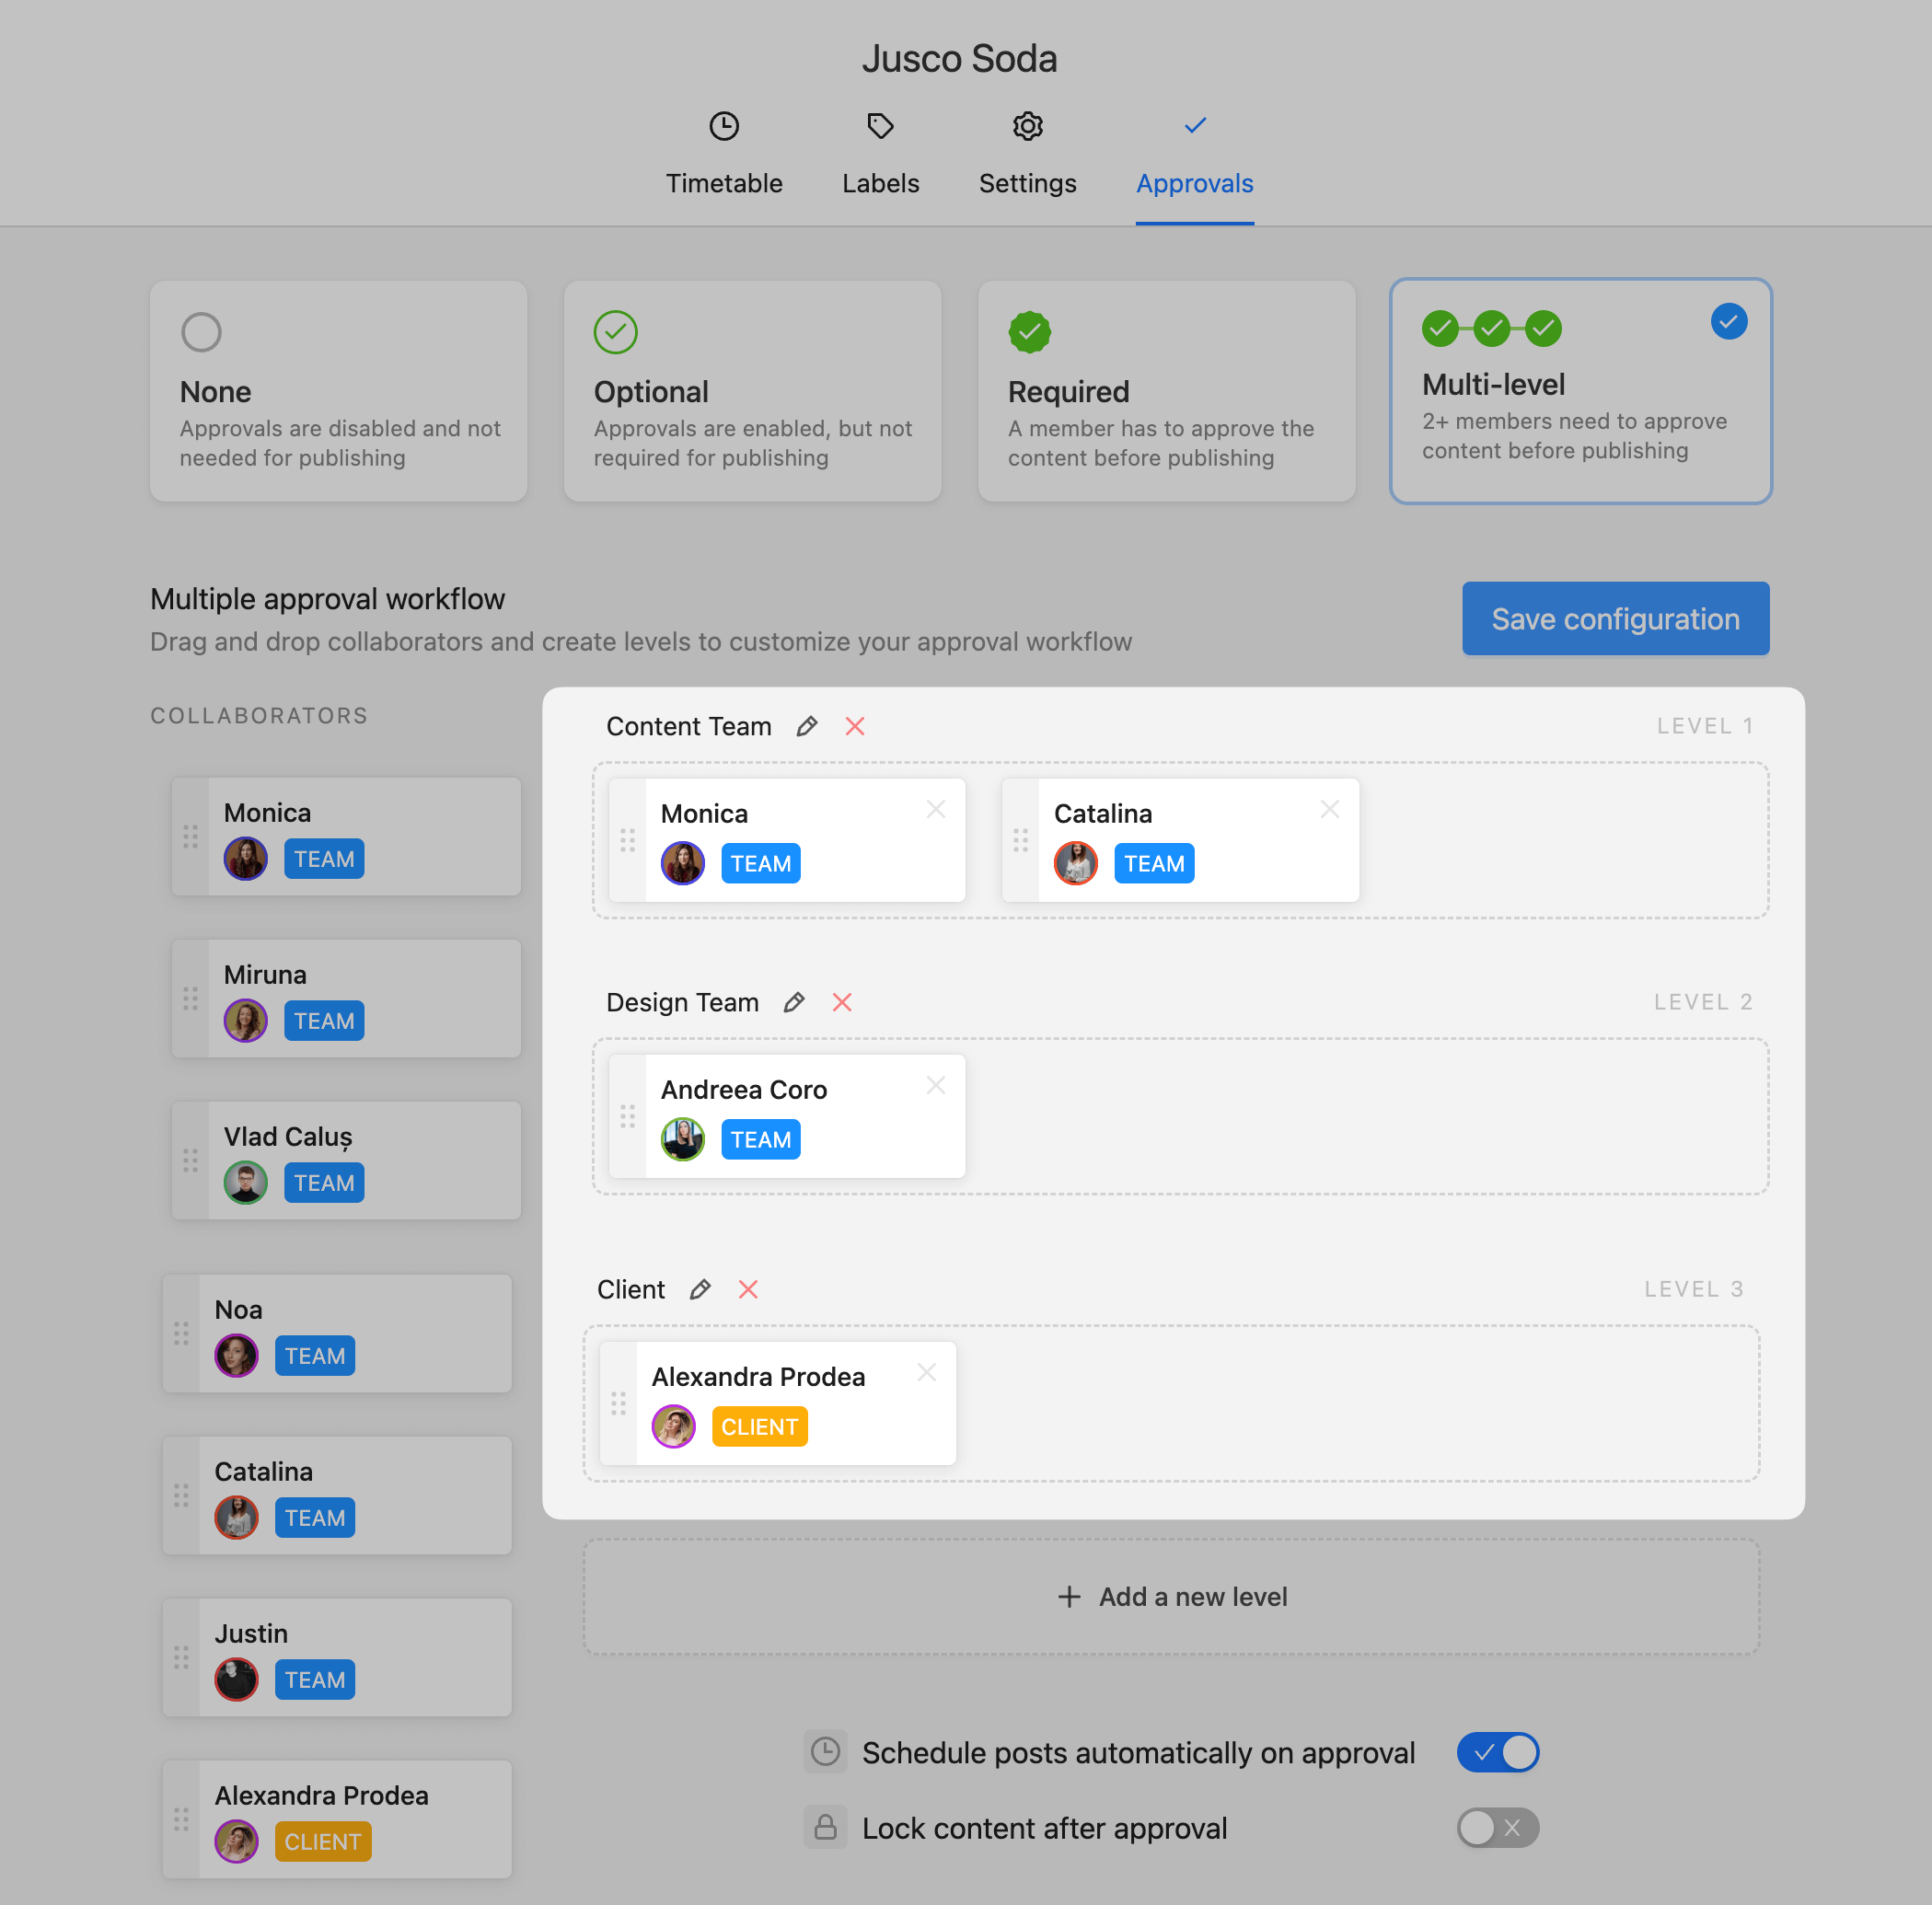 multiple layers of approval settings for content team, design team, and client